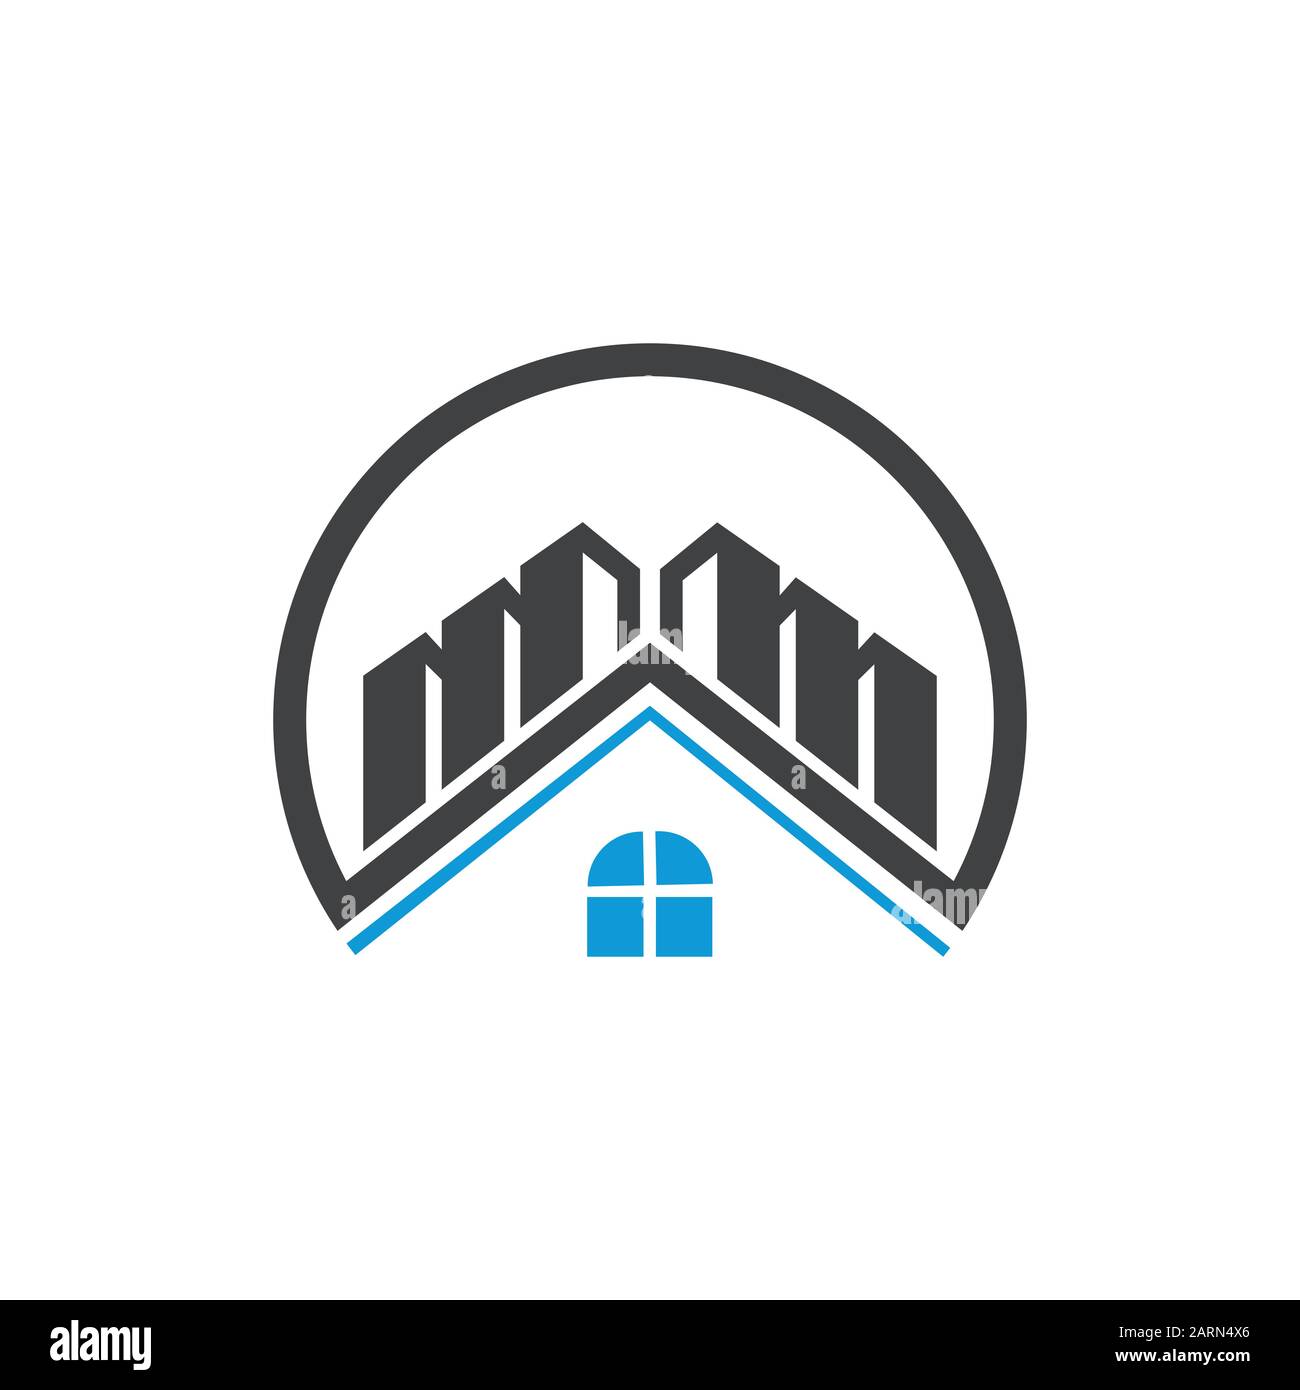 Real Estate Business Logo Vector Template. Abstract house or home logo. Building, Property Development, and Construction Logo. Stock Vector